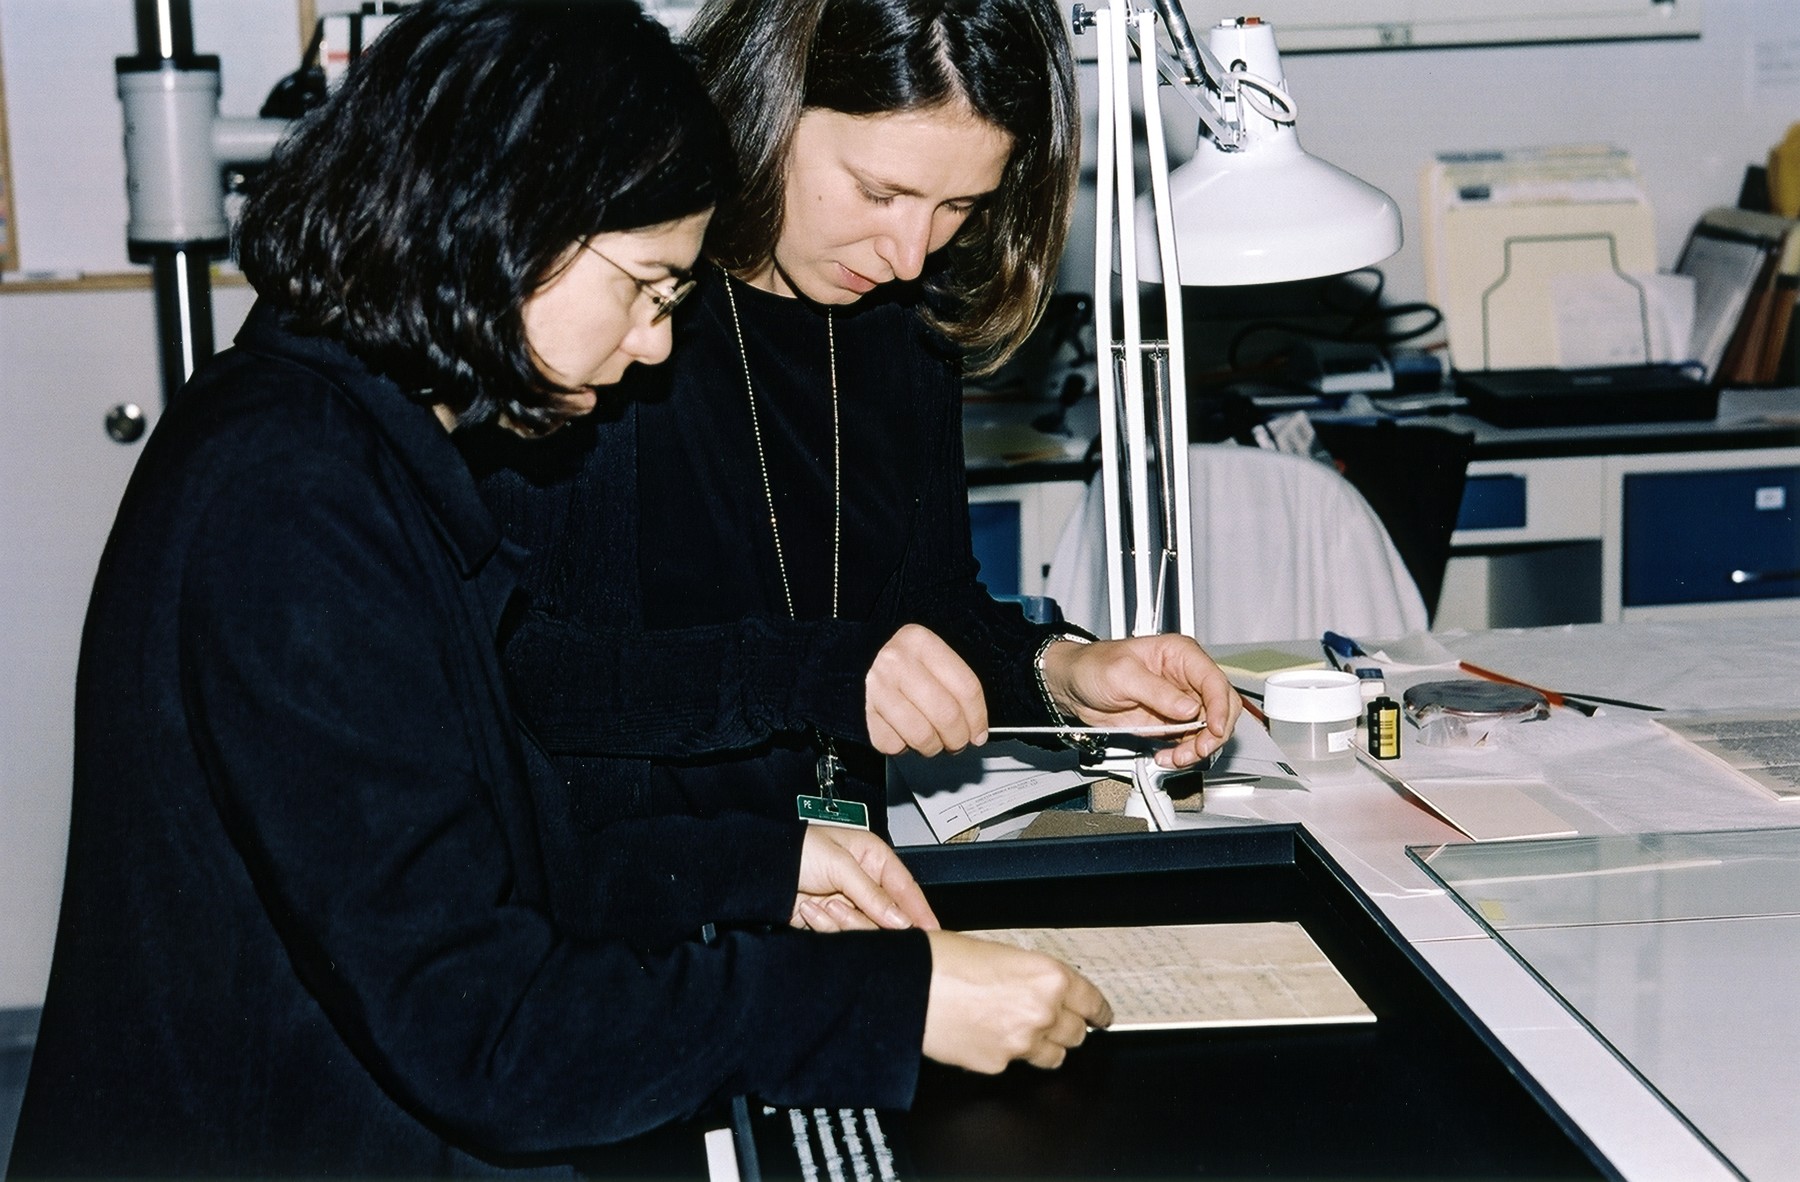 Photo conservator Emily Jacobson and Permanent Exhibition Coordinator Kathleen Mulvaney measure an artifact in the Museum's conservation lab before it is installed in the Permanent Exhibition as part of a regular rotation plan.

The document pictured is the ethical will of Elkhanan Elkes, the chairman of the Kovno ghetto Jewish Council.